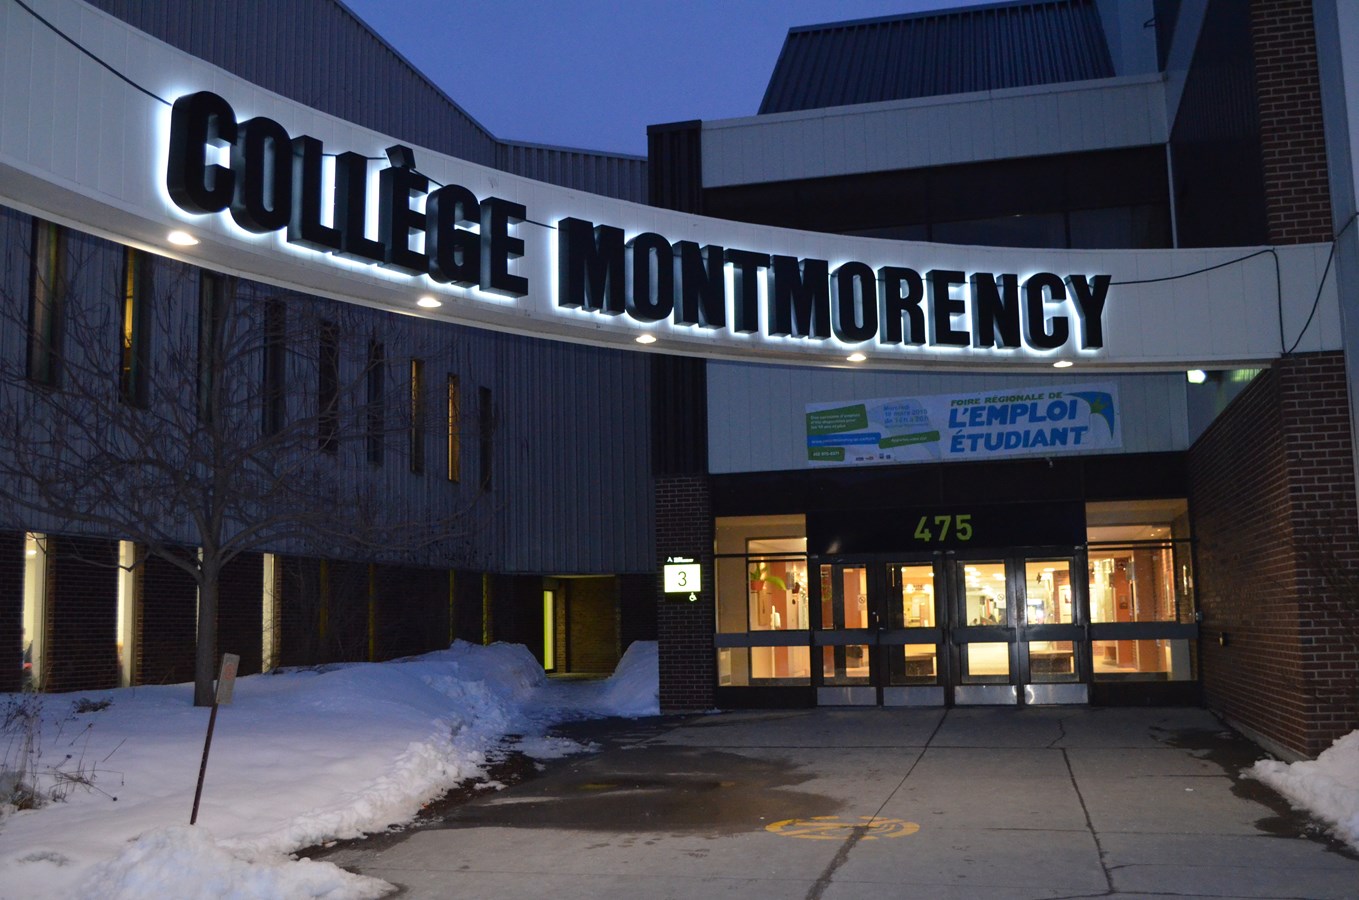 College Montmorency 37